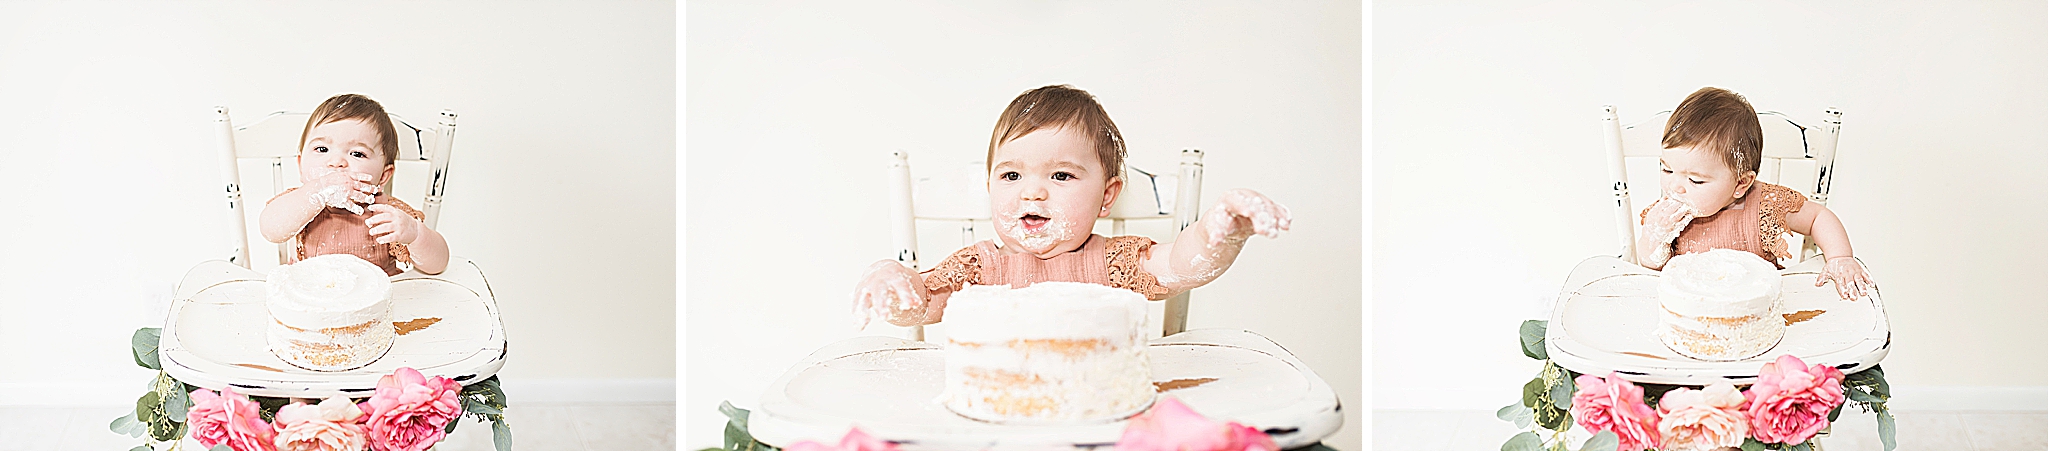 baby in high chair smashing their first cake